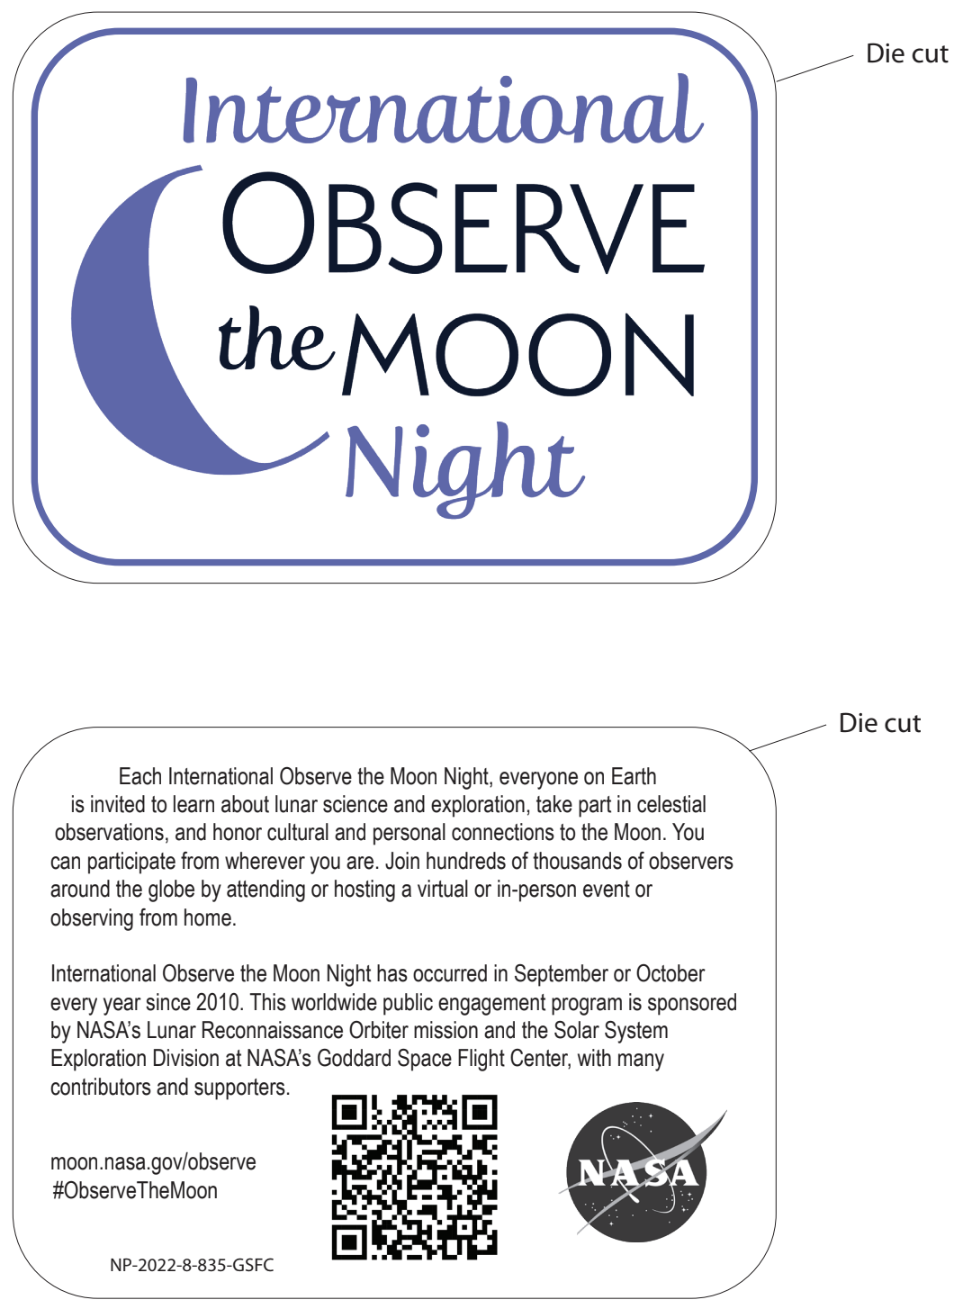 Front side of sticker: The words "International Observe the Moon Night" are written to the right of a purple waning crescent moon. Back side of sticker: "Each International Observe the Moon Night, everyone on Earth is invited to learn about lunar science and exploration, take part in celestial observations, and honor cultural and personal connections to the Moon. You can participate from wherever you are. Join hundreds of thousands of observers around the globe by attending or hosting a virtual or in-person event or observing from home. International Observe the Moon Night has occurred in September or October every year since 2010. This worldwide public engagement program is sponsored by NASA's Lunar Reconnaissance Orbiter mission and the Solar System Exploration Division at NASA's Goddard Space Flight Center, with many contributors and supporters." The back side of the sticker also includes a NASA logo, a QR code, and "moon.nasa.gov/observe", "#ObserveTheMoon", and a product code: NP-2022-8-835-GSFC.